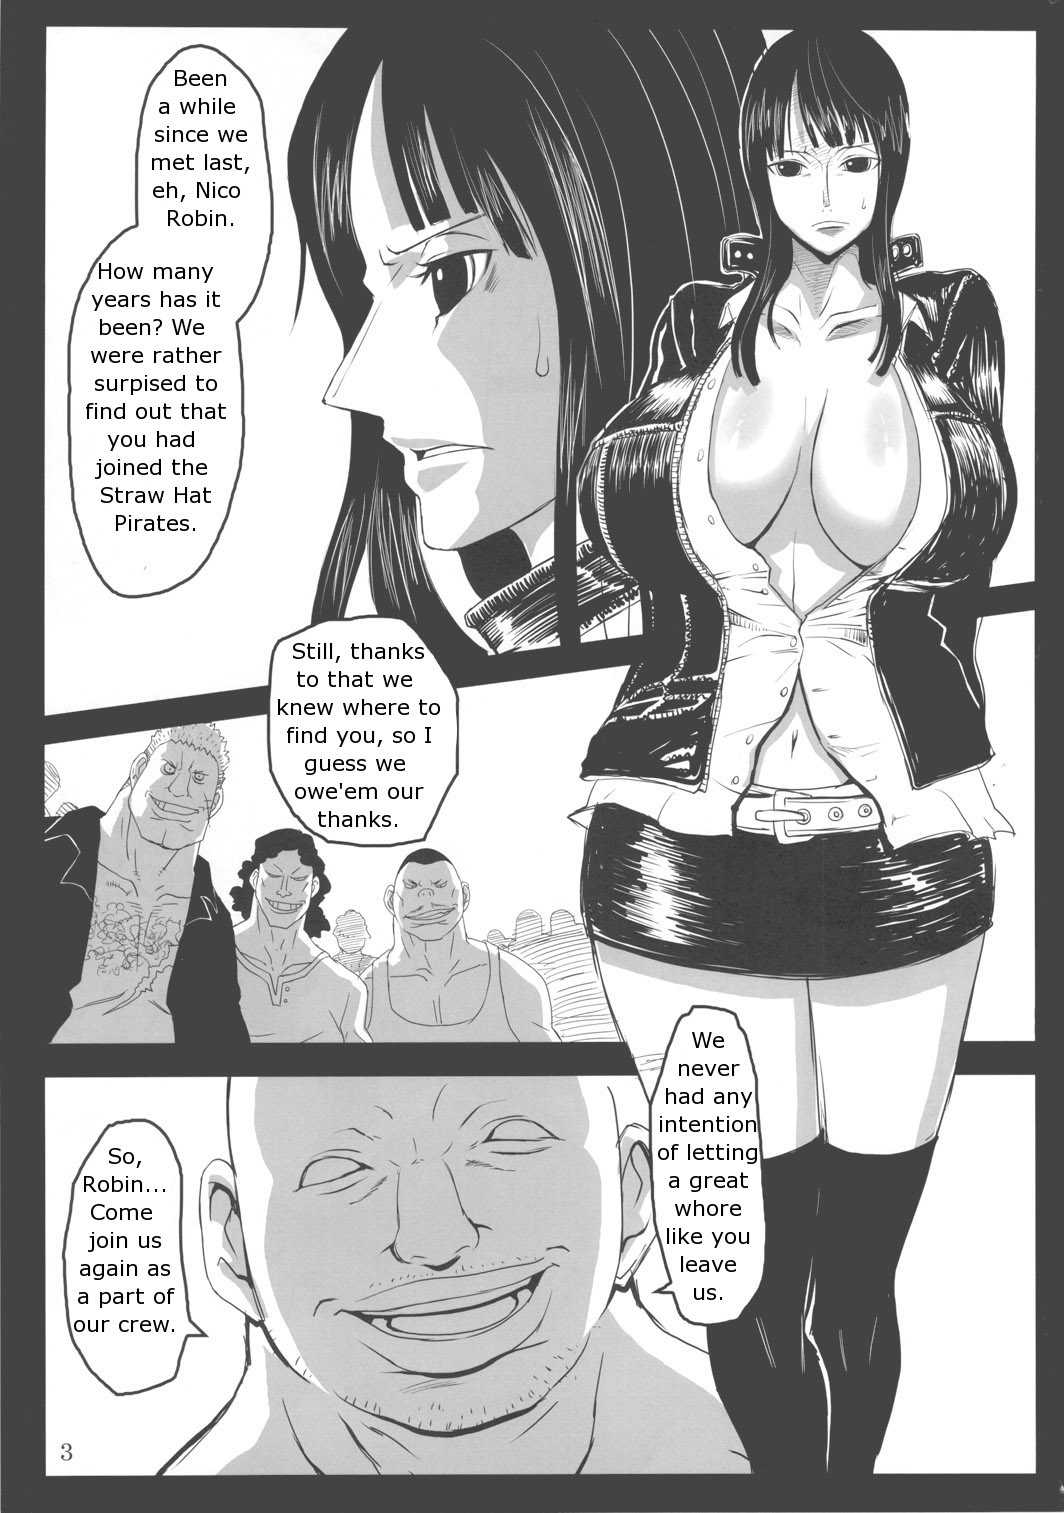 (C78) [8graphica (Yoshitama Ichirou)] Metabolism-OP - The tale of the big-busted, big-assed archaeologist Nico Robin&#039;s UNKNOWN PAST (One Piece) [English] (C78) (同人誌) [エイトグラフィカ (吉玉一楼)] メタボリズムOP 巨乳巨尻娼婦ニコロビンの消したい過去 (ワンピース)